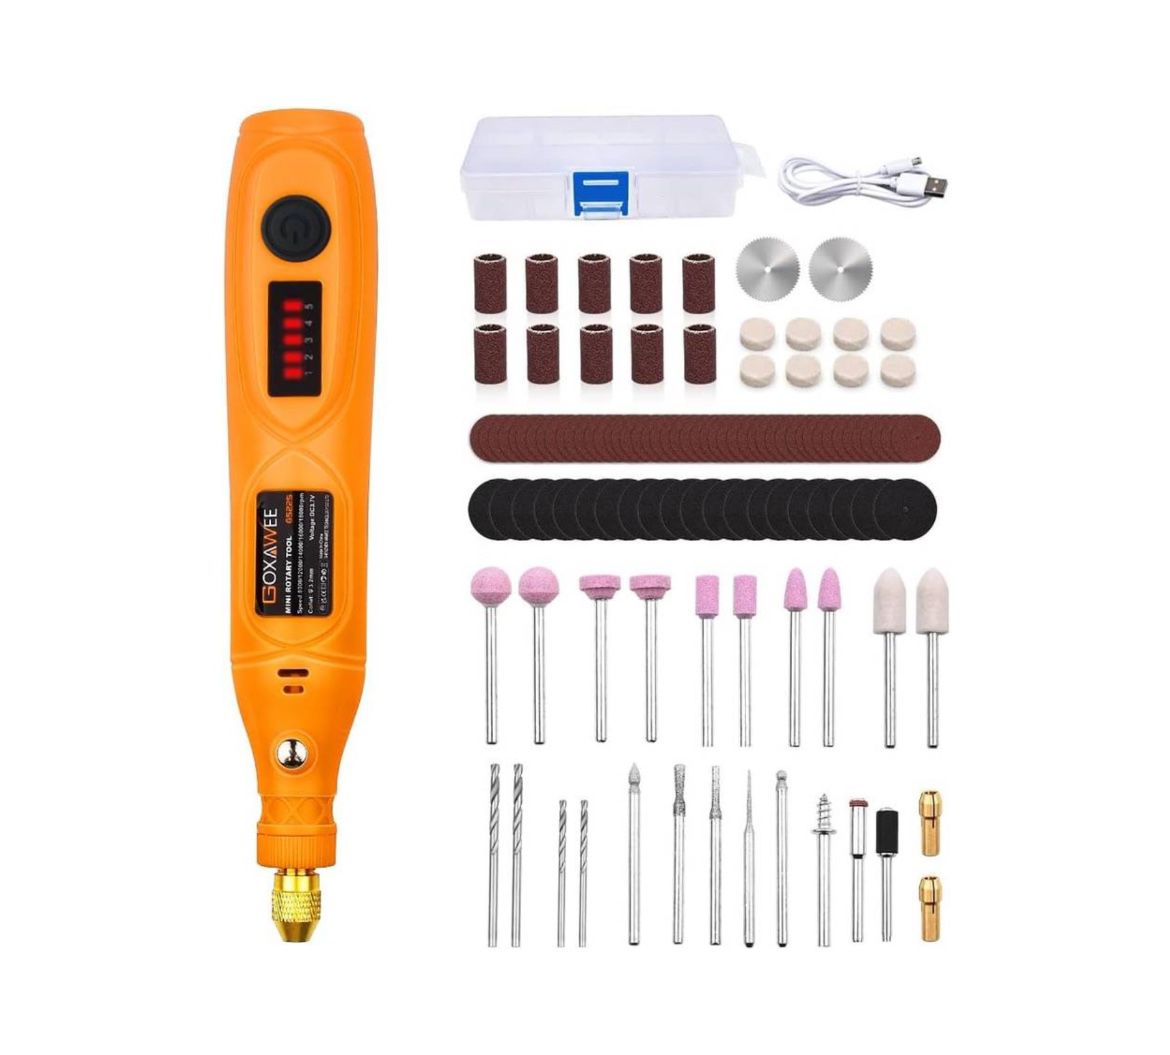 new Mini Cordless Rotary Tool Kit with 105pcs Accessories, USB Charging 5-Speed 18000rpm Multi-Purpose Art Craft Tool with 3.7V Li-ion Battery for Han